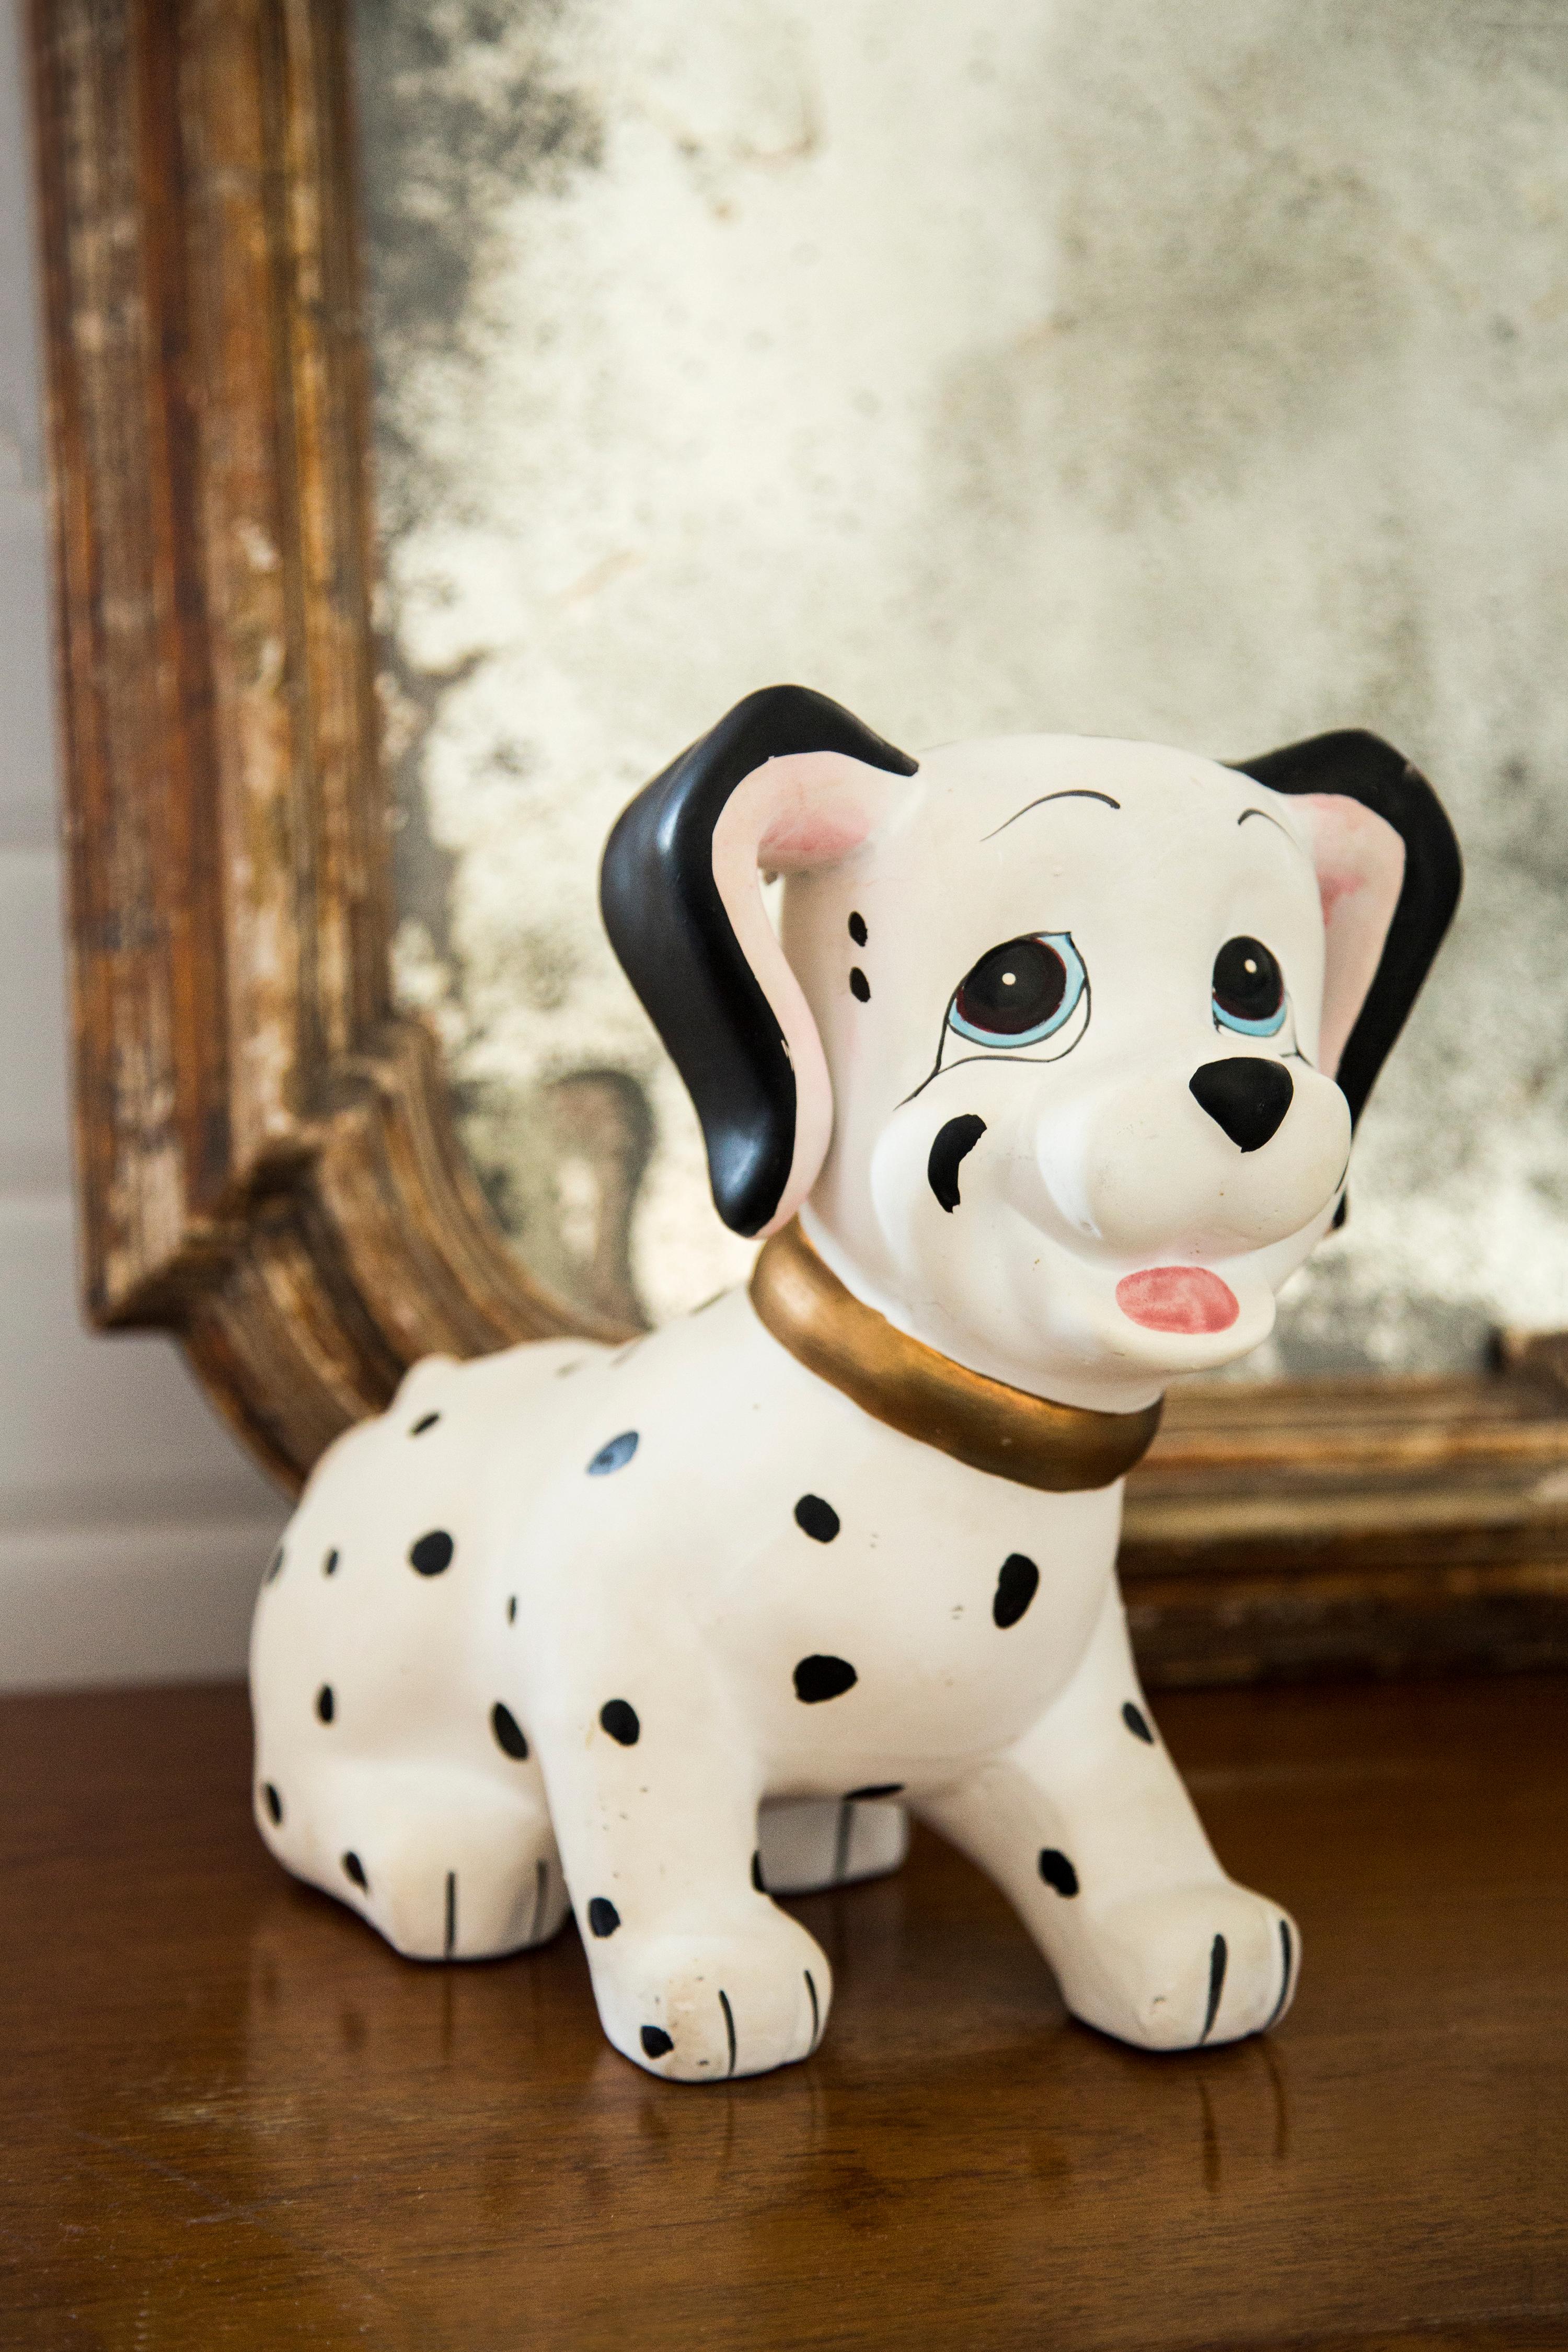 Painted ceramic, very good original vintage condition. No damages or cracks. Beautiful and unique decorative sculpture. Dalmatian dog sculpture was produced in Italy. Only one dog available.